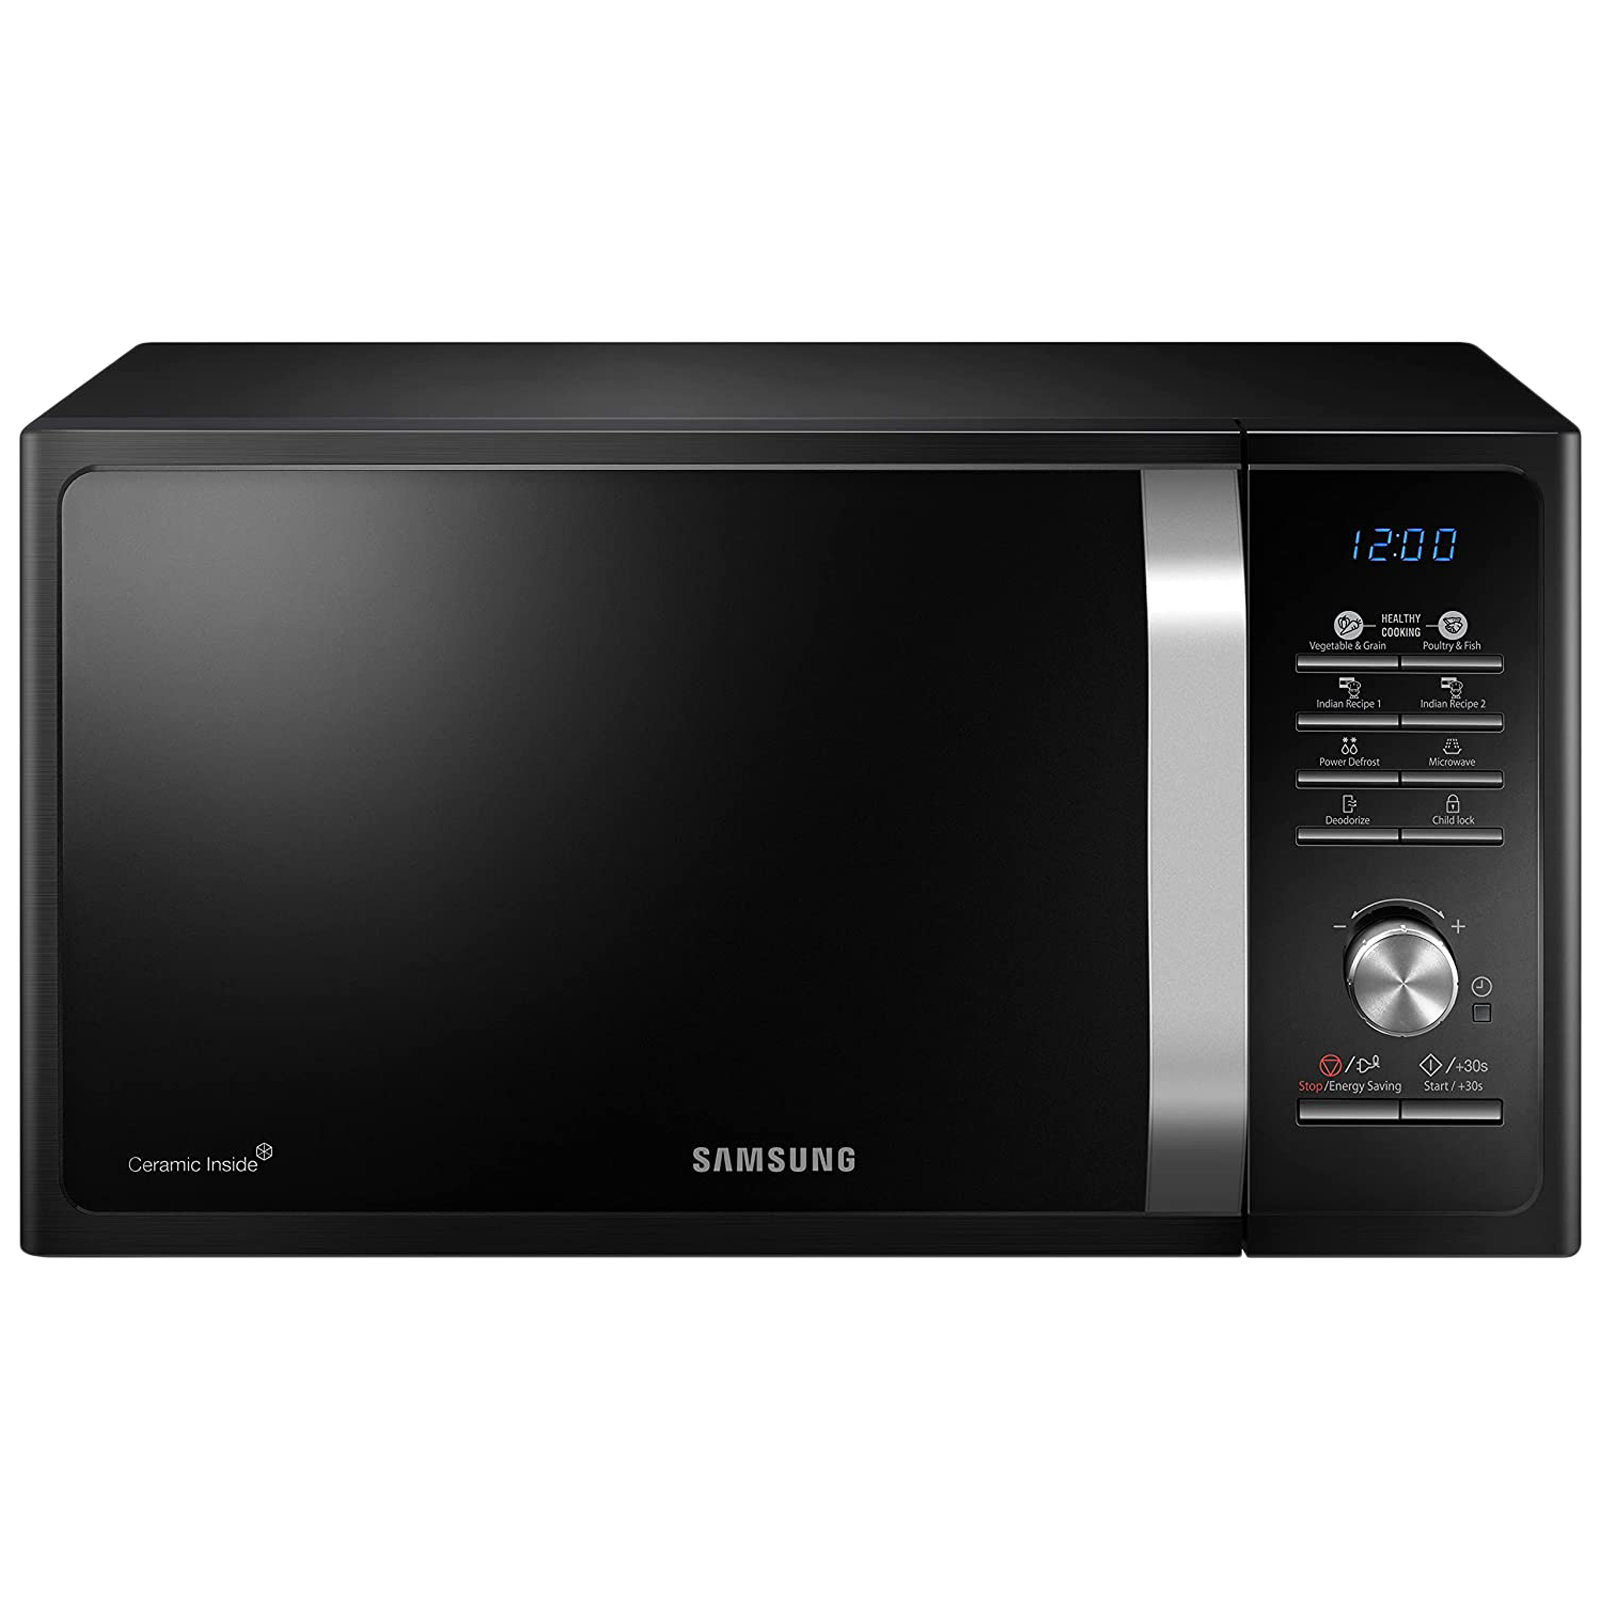 SAMSUNG 23 Litres Solo Microwave Oven (20 Preset Cooking Mode with Power Defrost, MS23A301TAK/TL, Black)_1